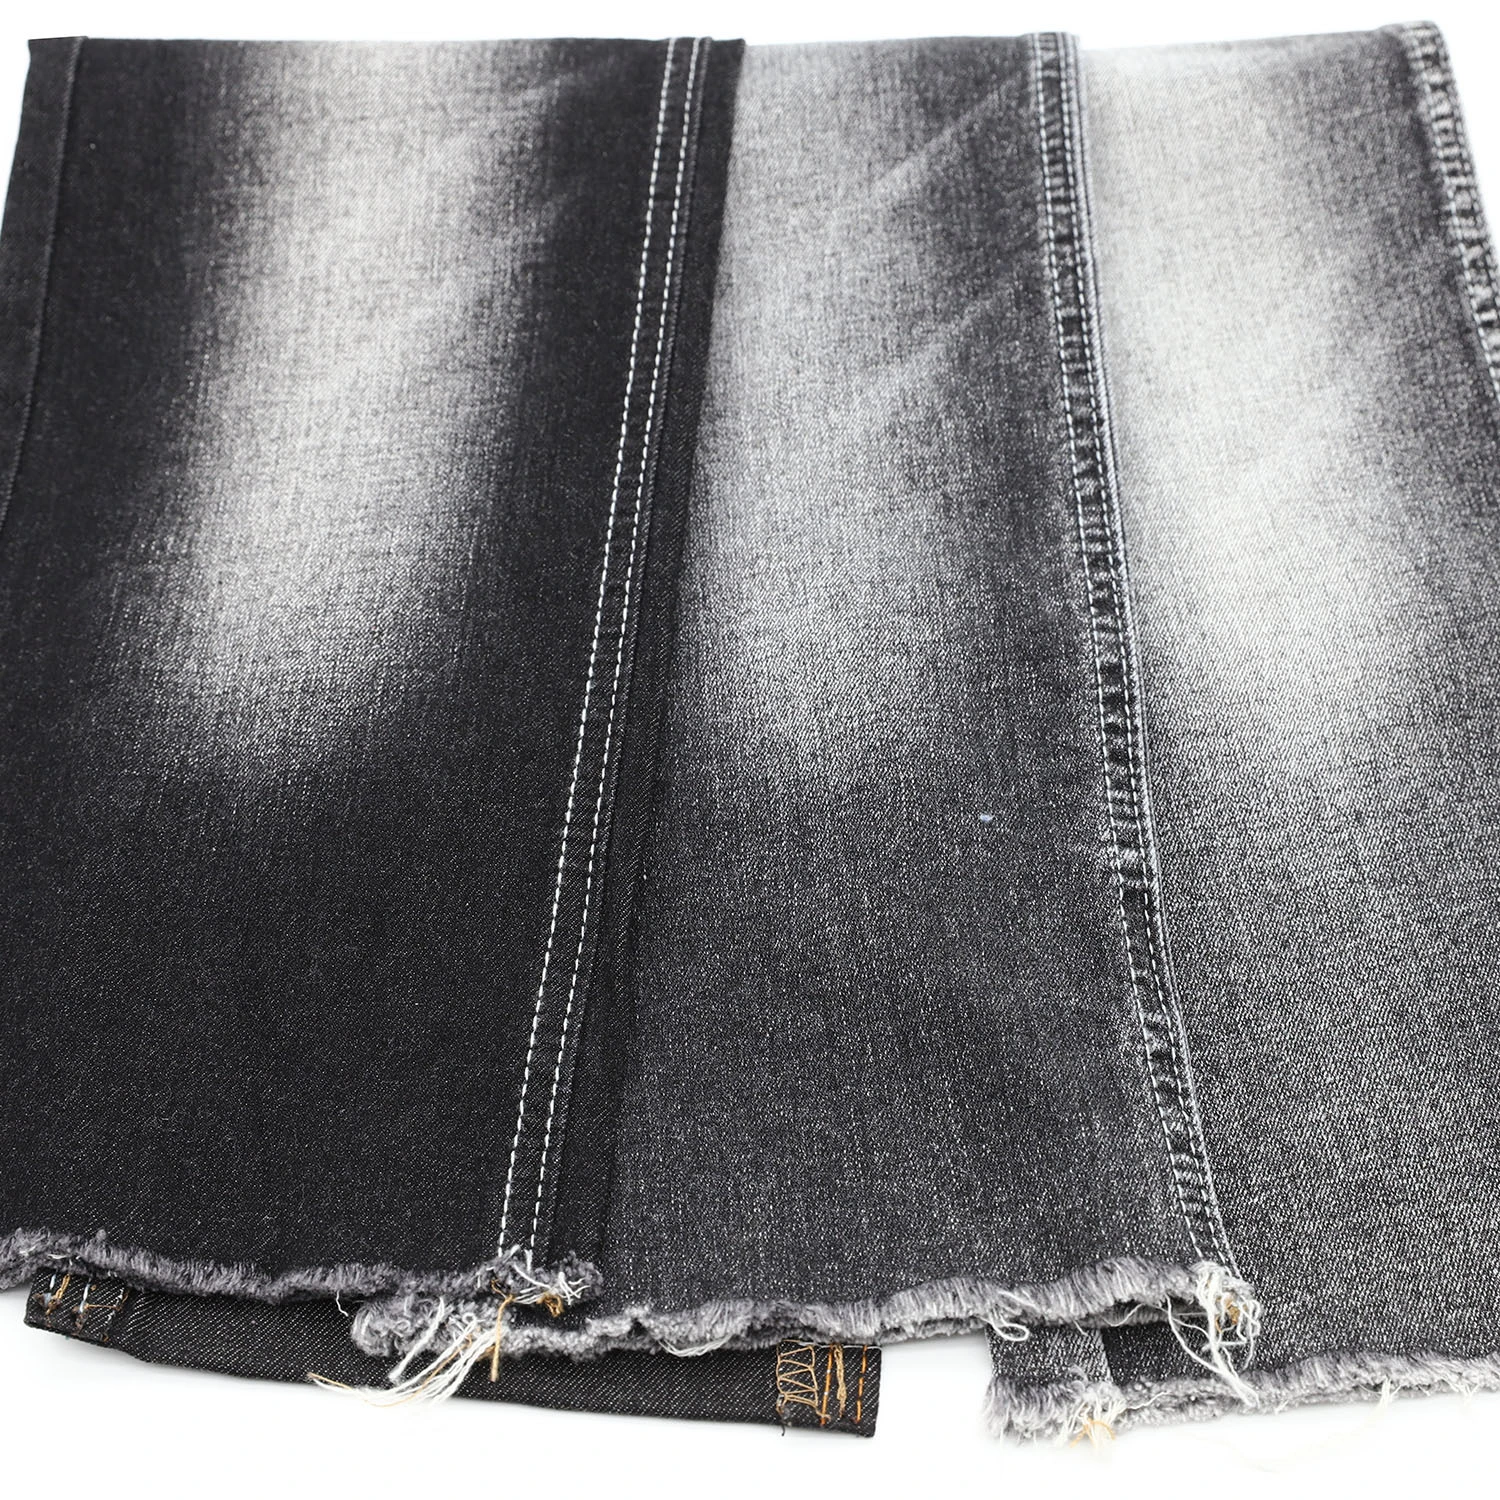 205H-8 70%Cotton 24.5%Poly 2.5%Spandex 3%other stretch denim fabric with good price 6